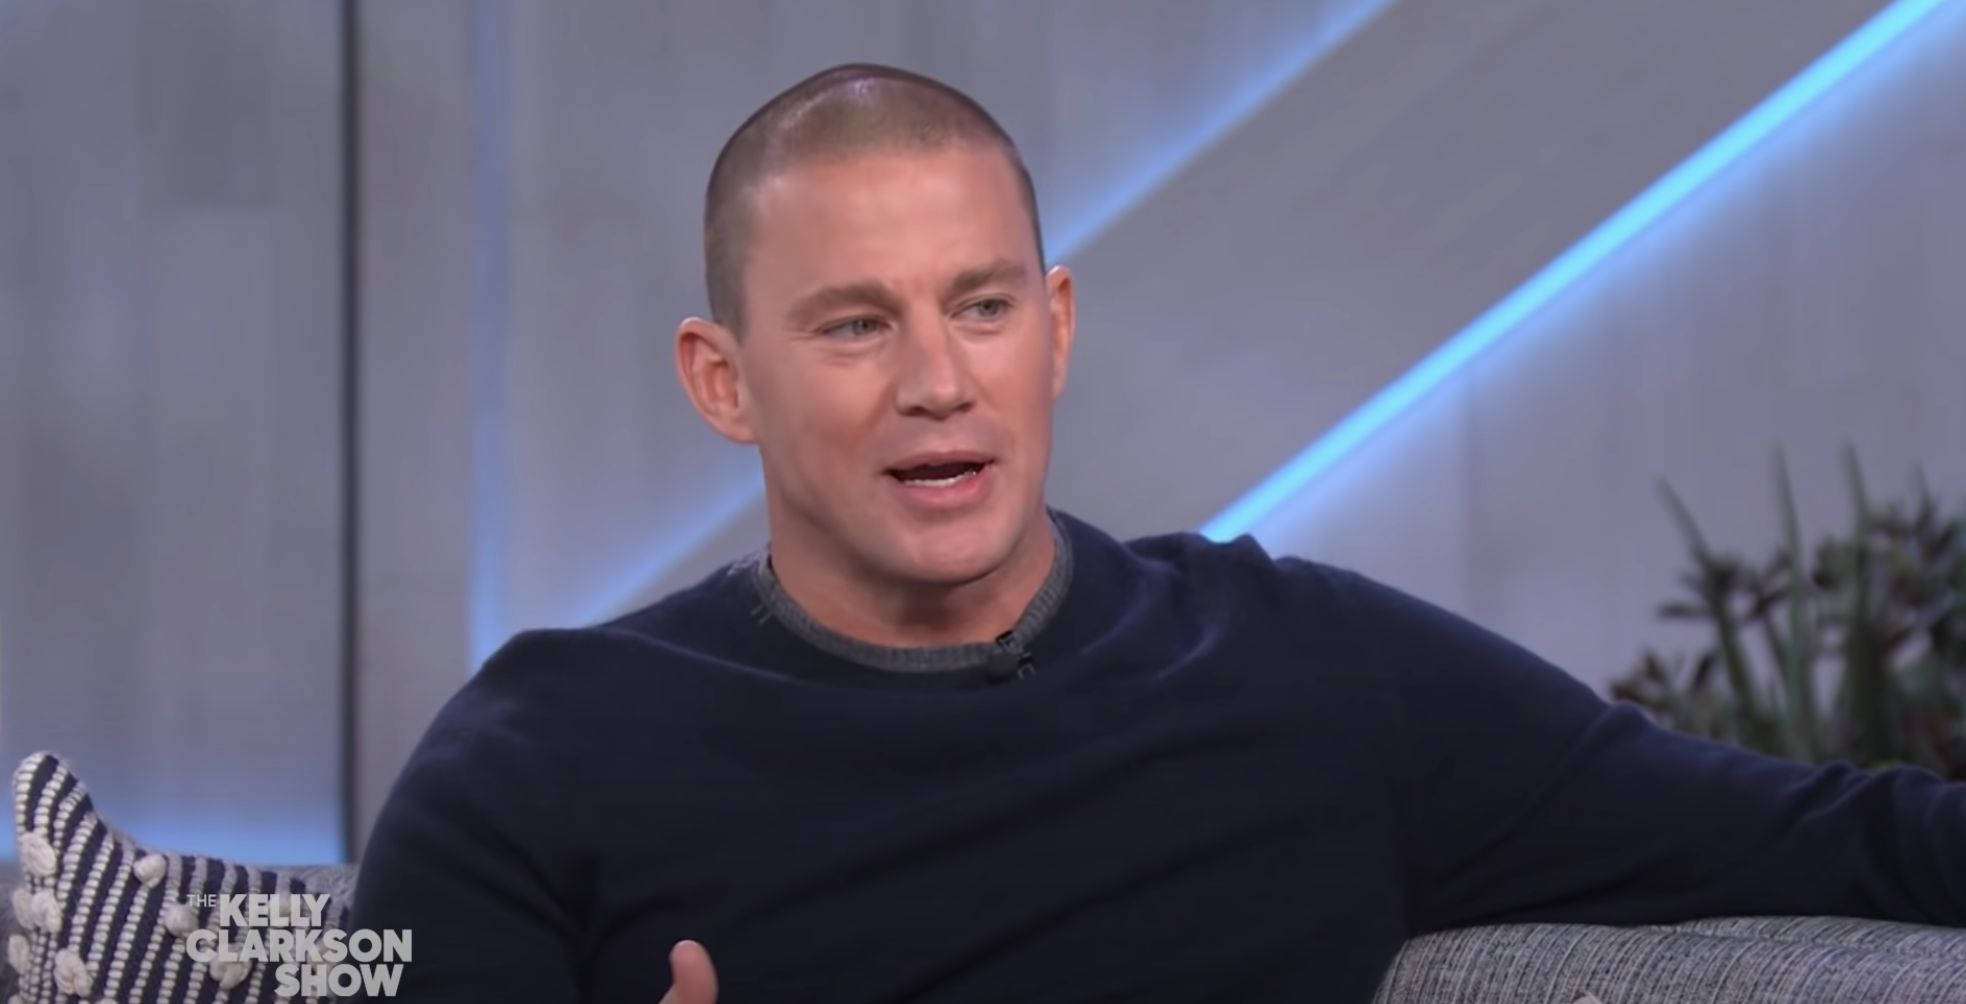 Channing Tatum on the Kelly Clarkson Show